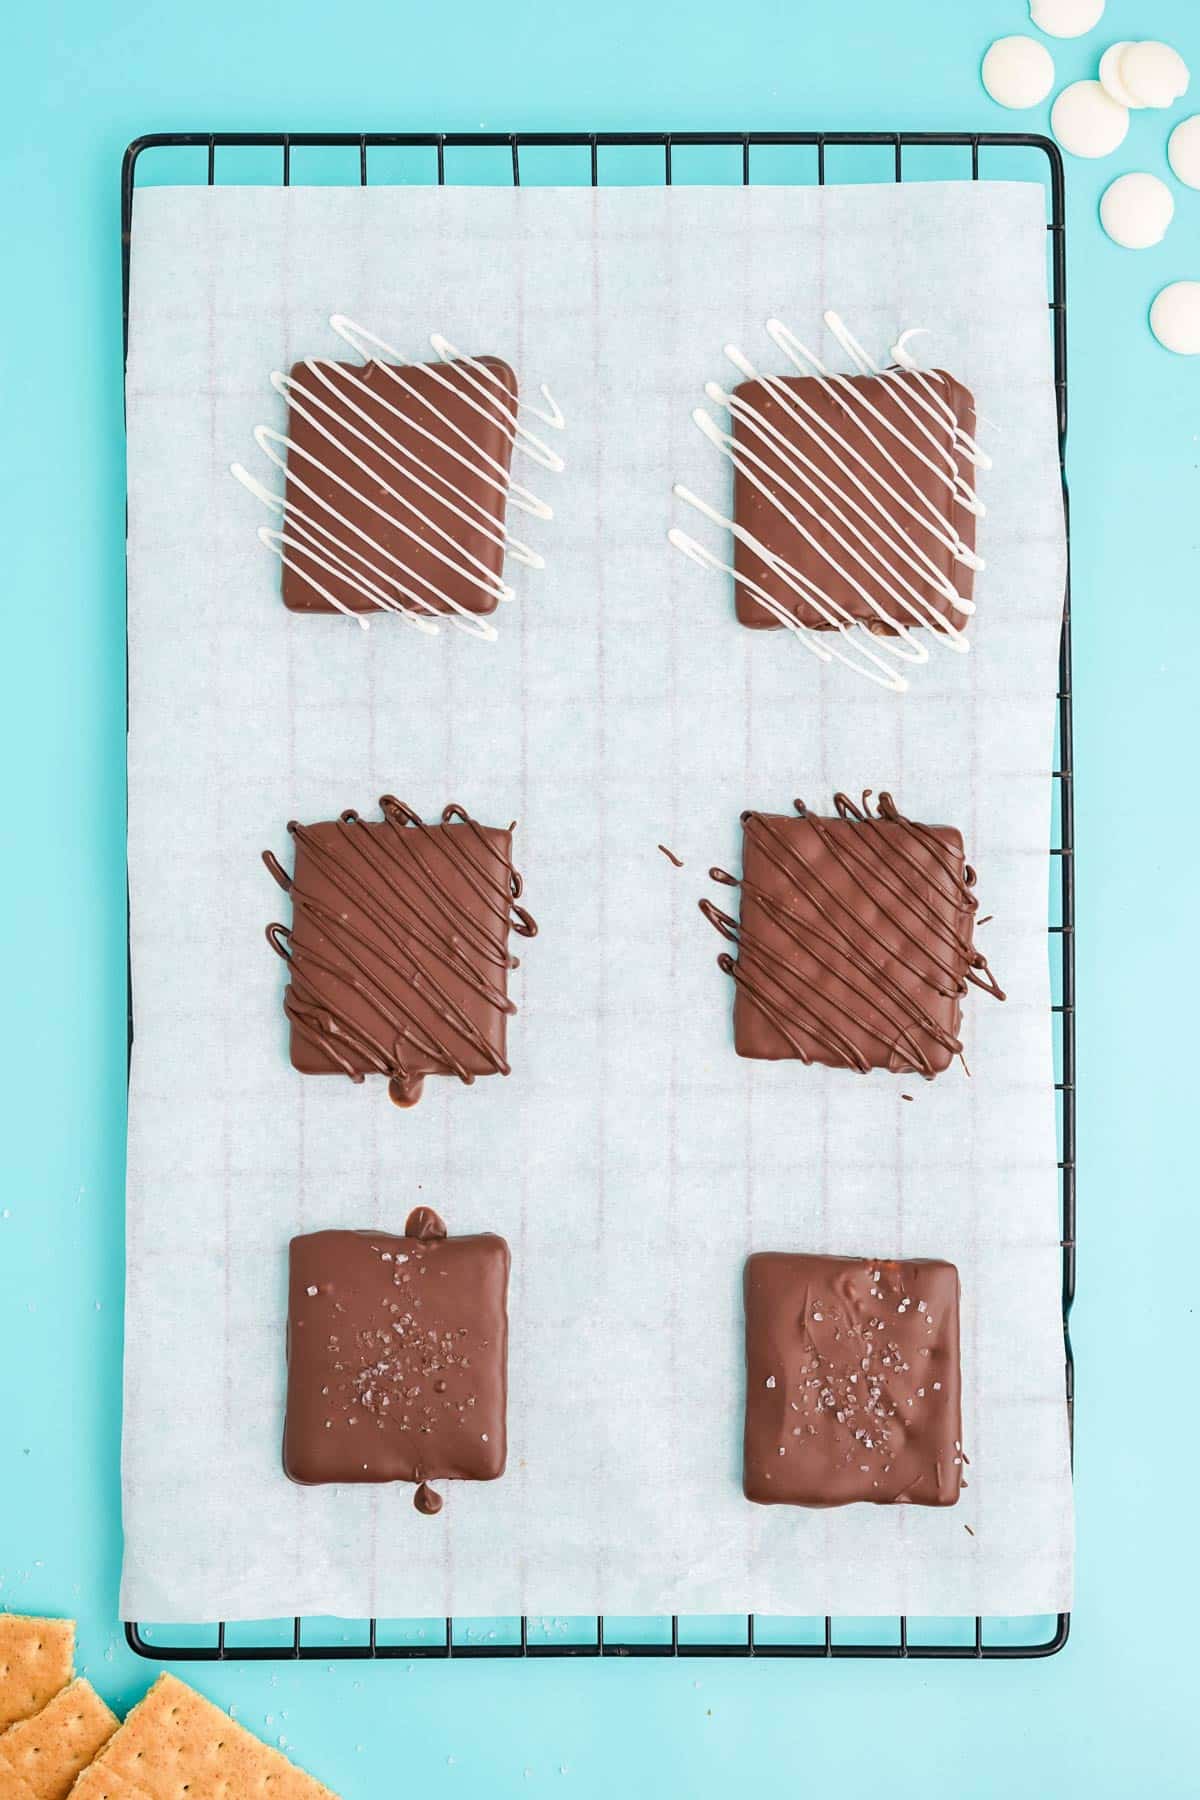 Finished chocolate covered graham crackers with different types of toppings for decoration.